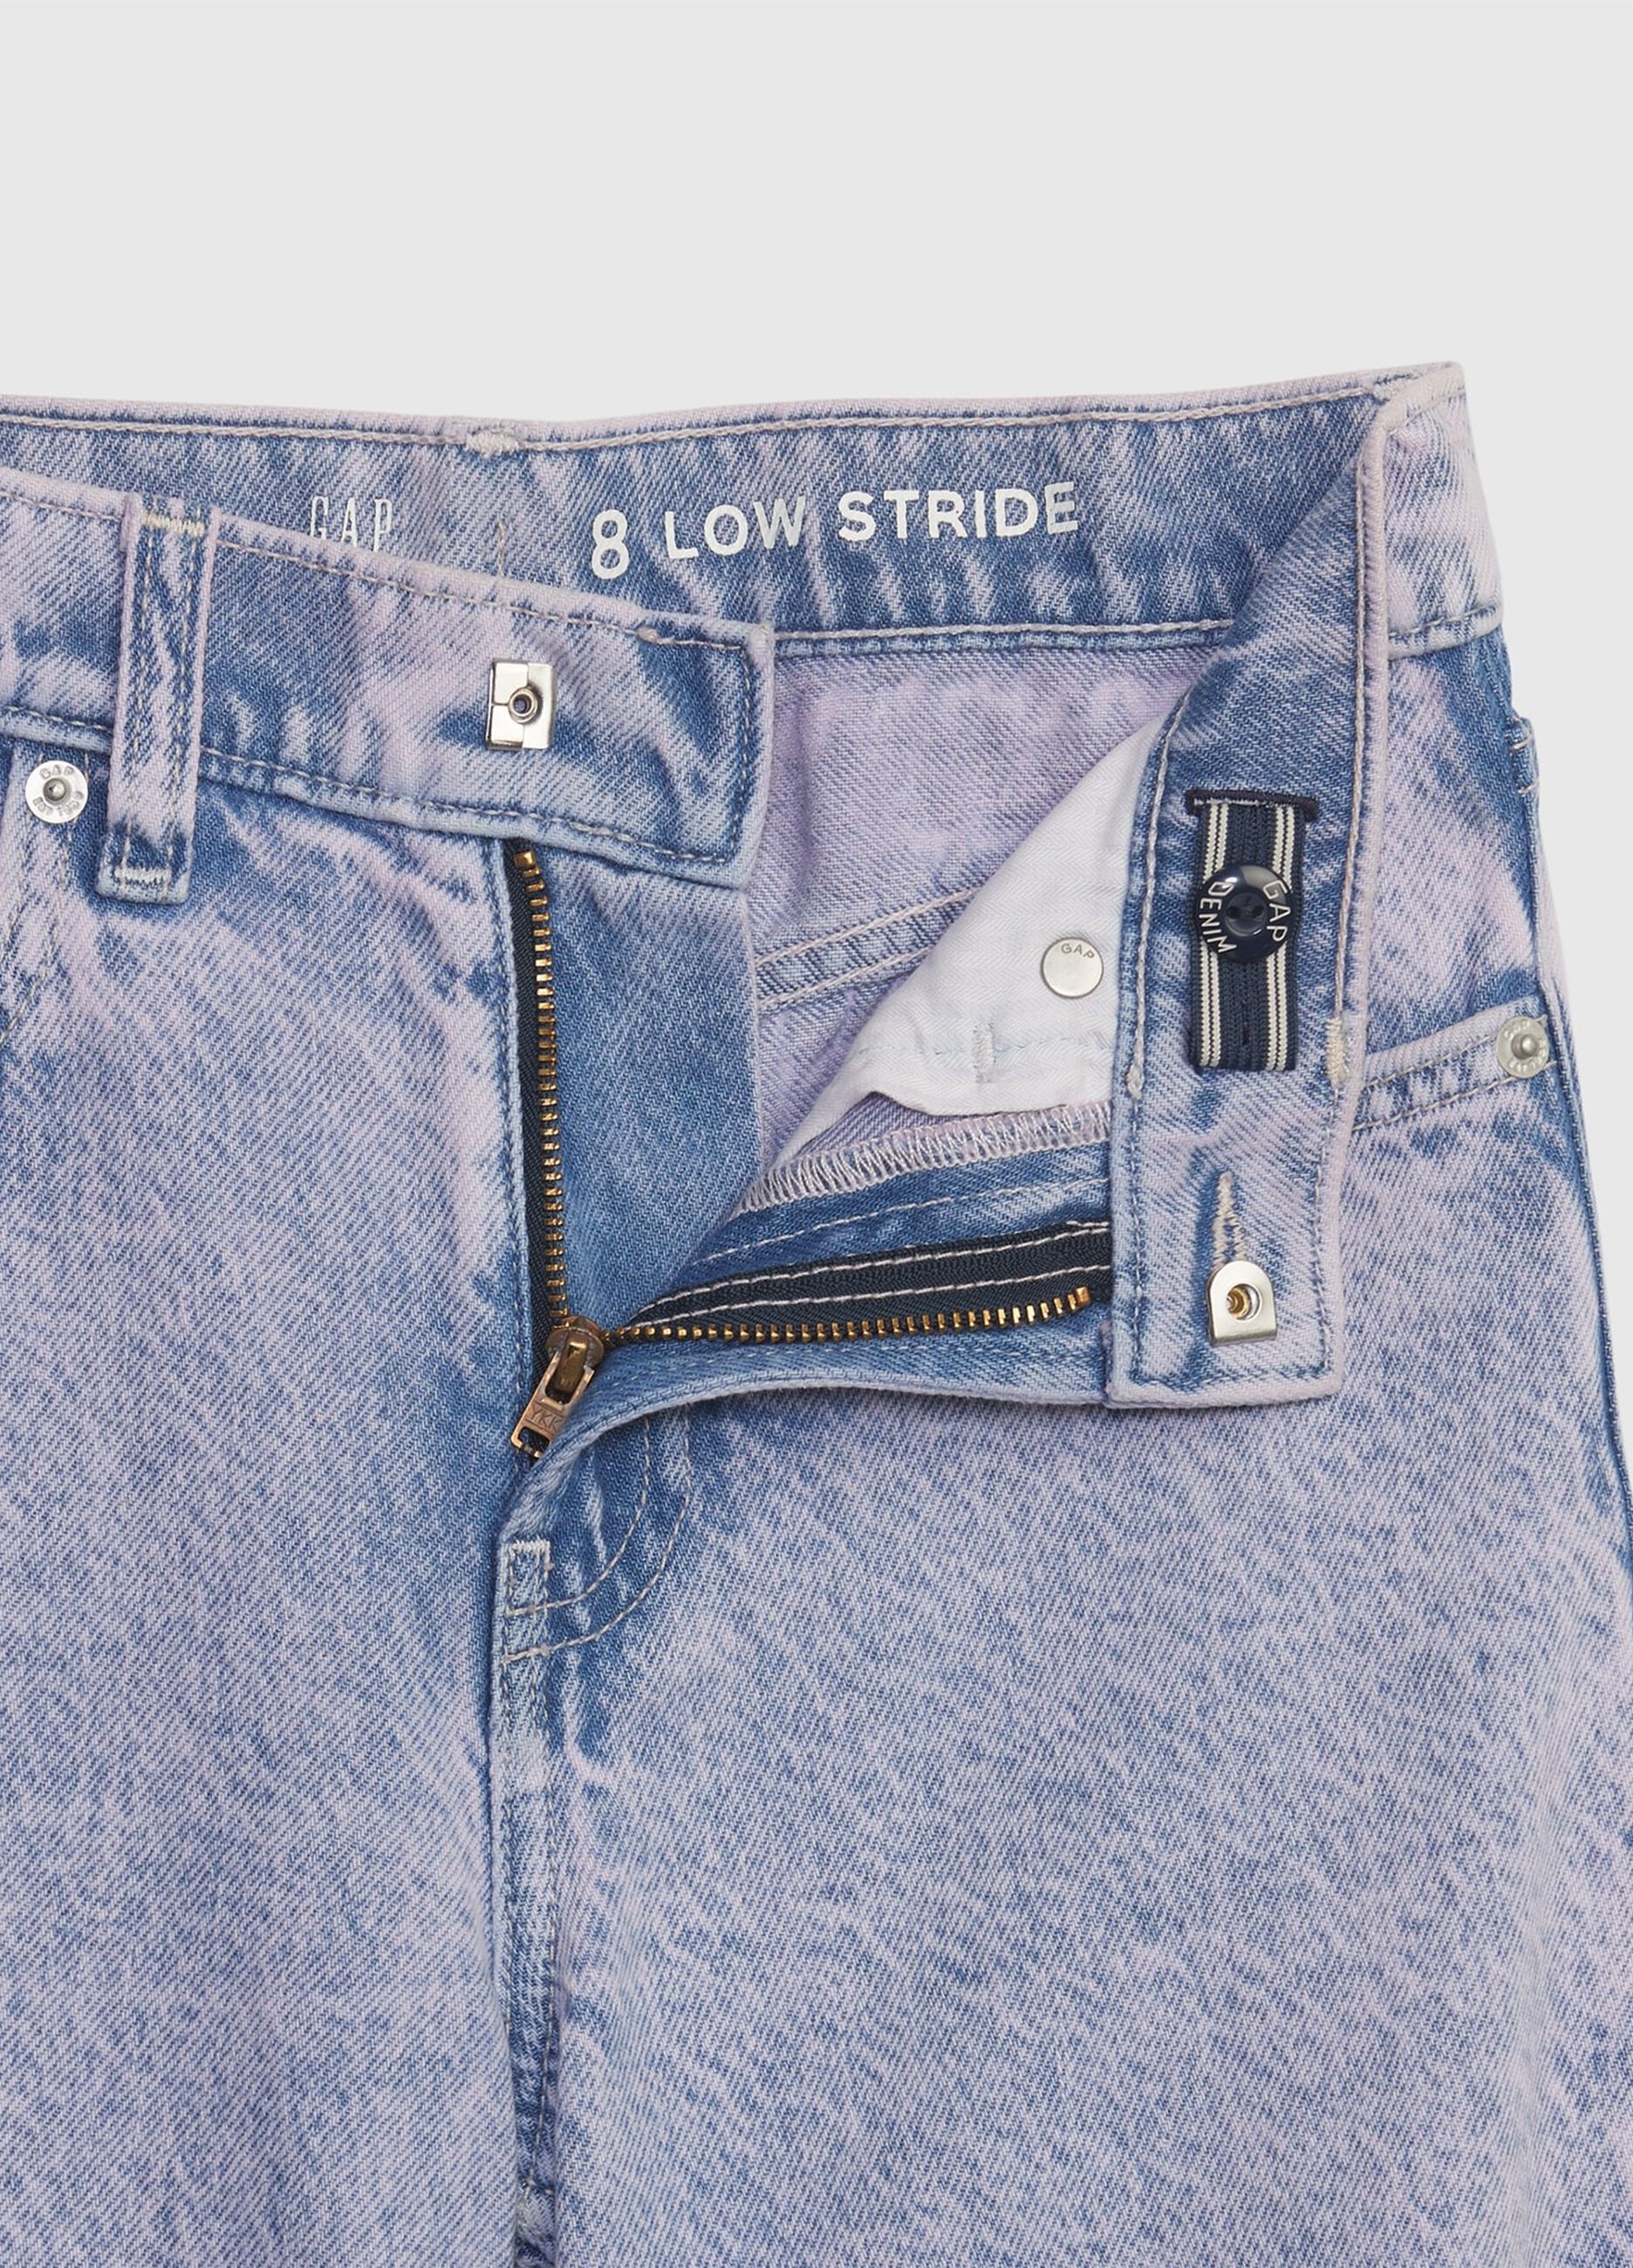 Low stride, mid-rise jeans_2